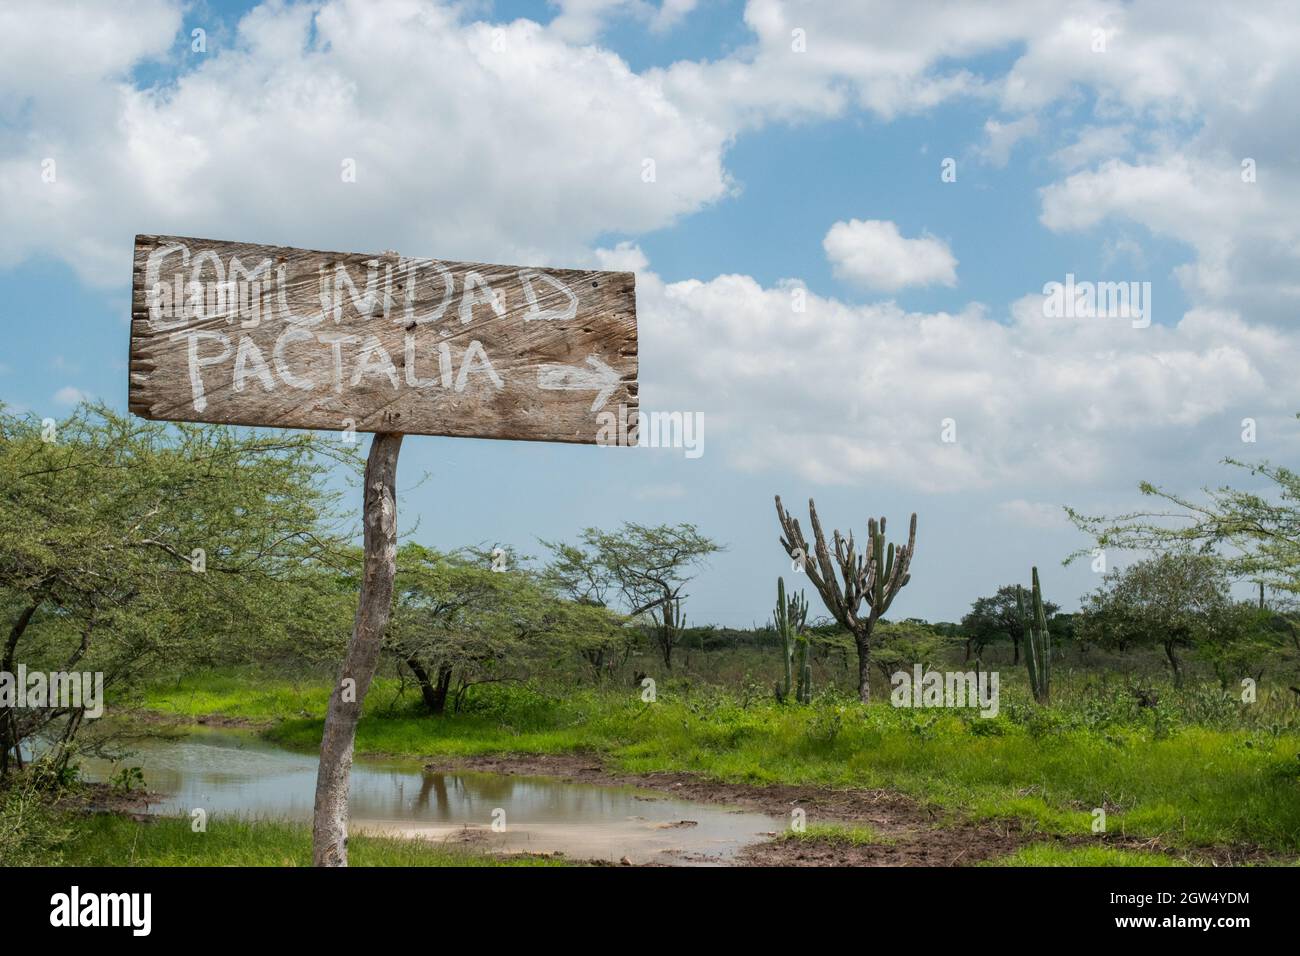 A sign that reads 'Pactalia Community' is seen during a Humanitarian Mission developed by 'De Corazon Guajira' in Mayapo at La Guajira - Colombia were they visited the Wayuu indigenous communities 'Pactalia, Poromana, Perrohuila' on September 26, 2021. The Guajira region in Colombia is the poorest region in Colombia, with its people commongly living without drinkable water, electricity and food. Stock Photo